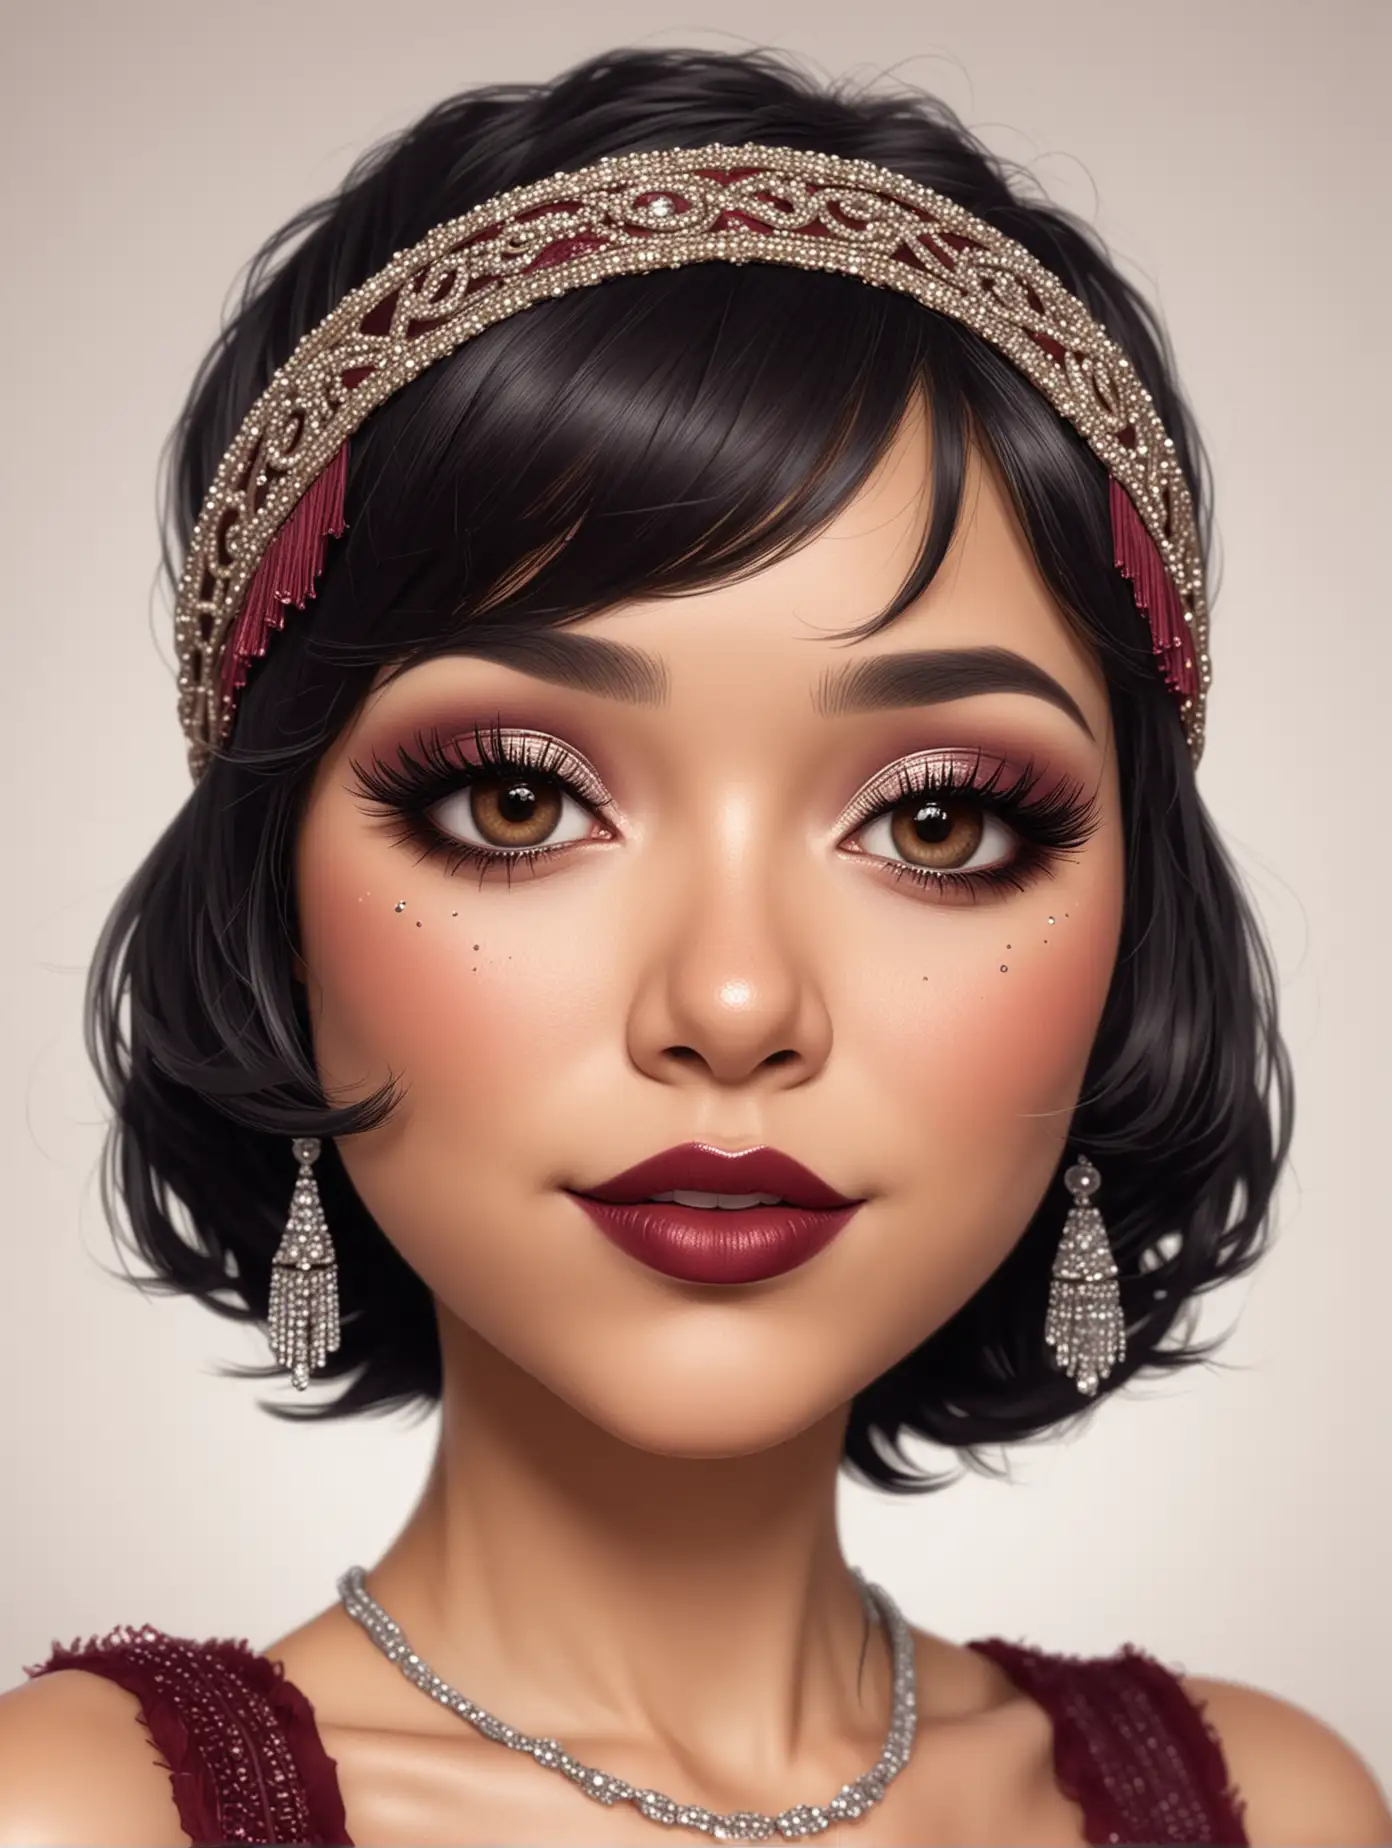 Stunning Latina Woman in 1920s Flapper Chic